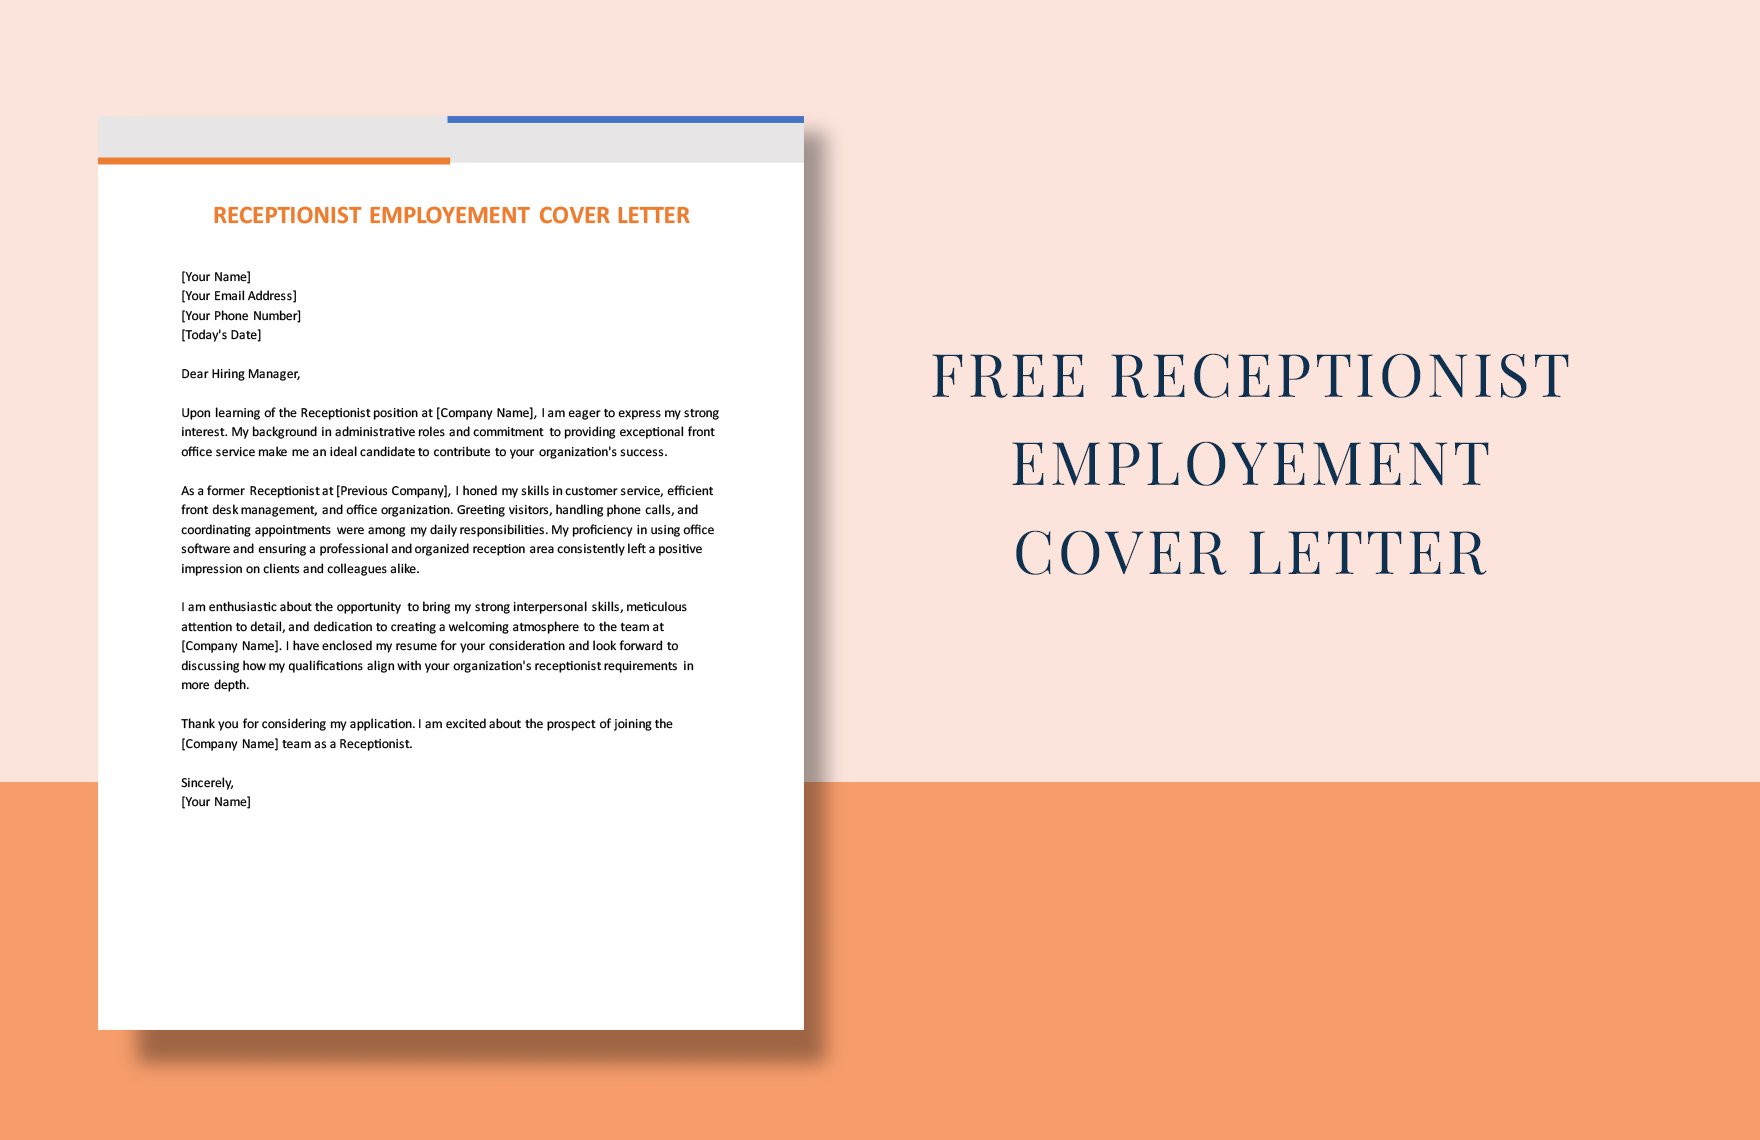 Receptionist Employment Cover Letter Template